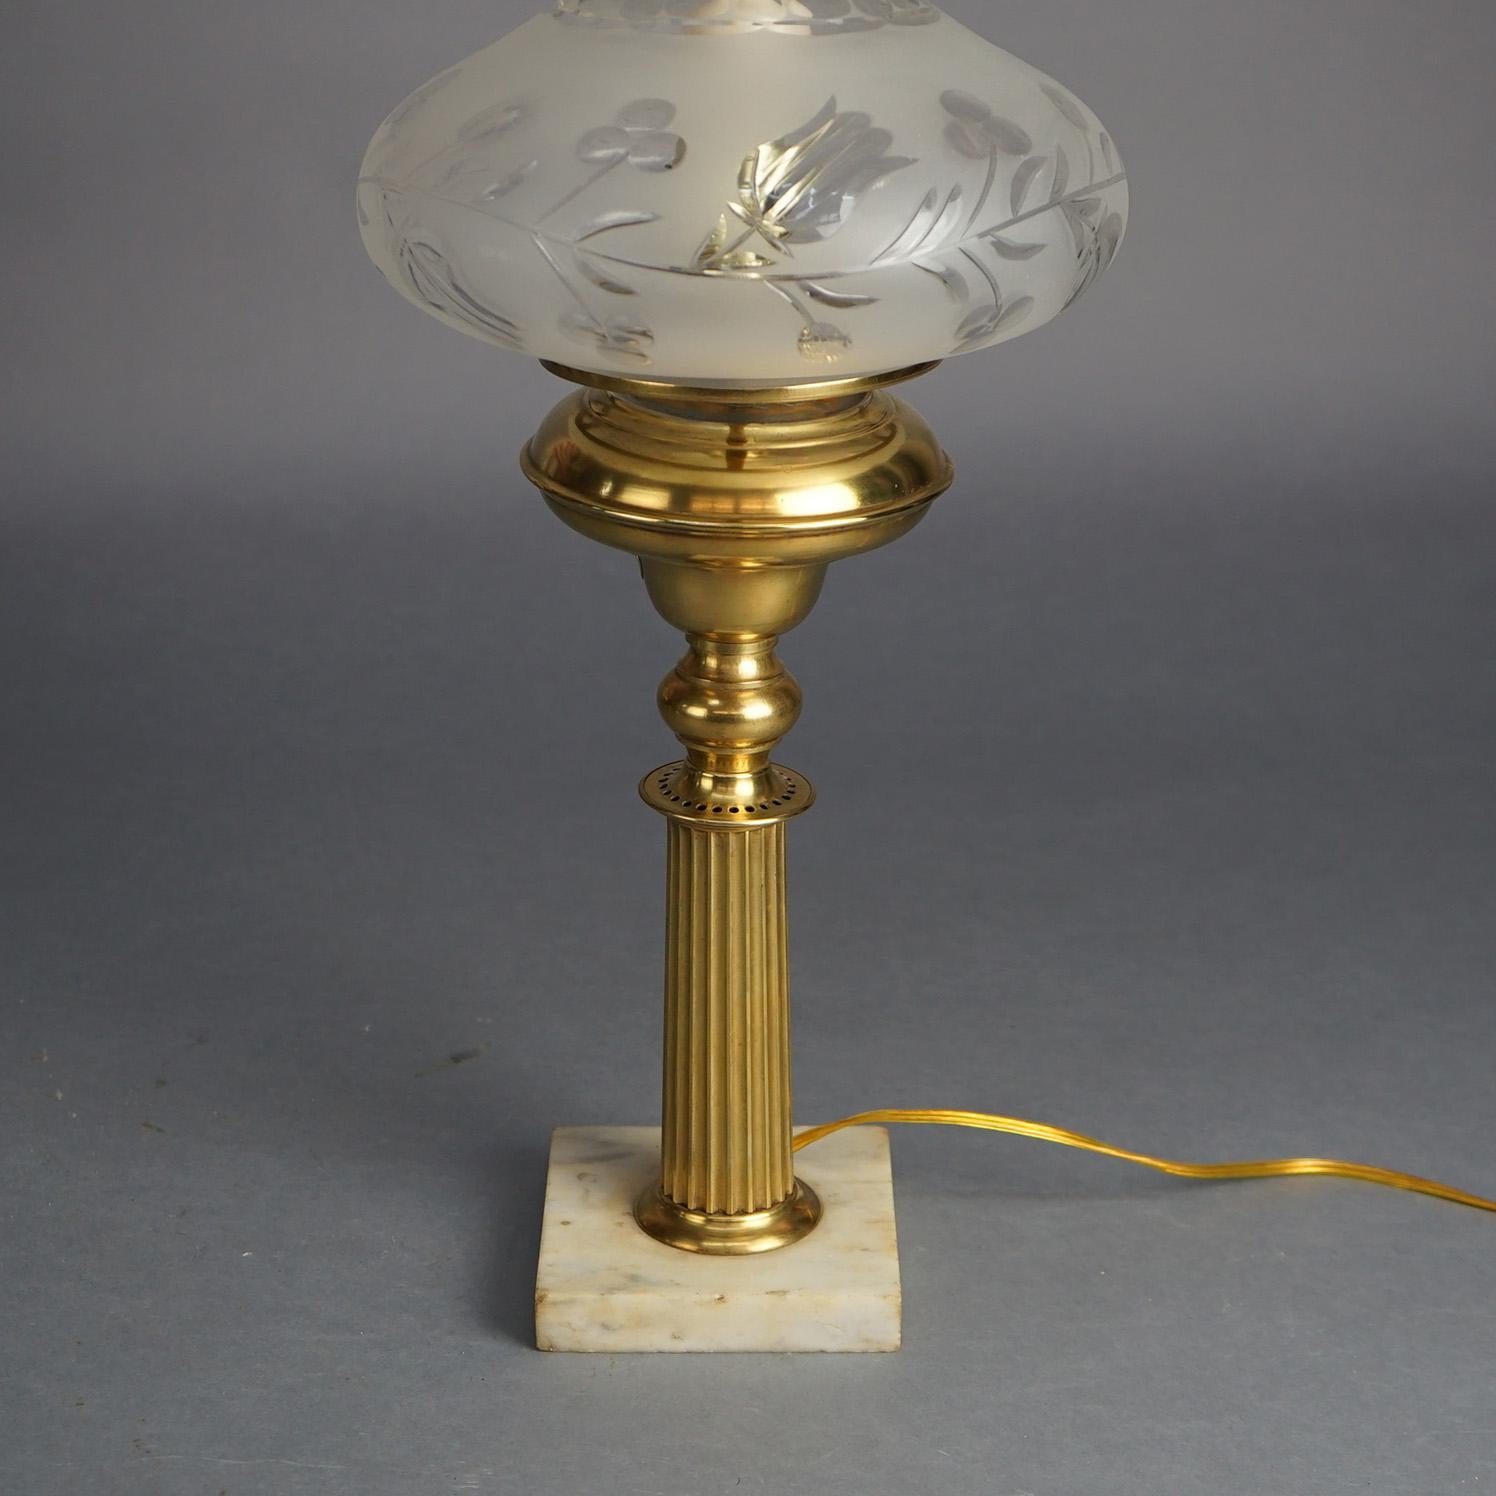 Antique Brass Solar Lamp with Tam-O-Shanter Cut Glass Shade & Marble Base C1840 In Good Condition For Sale In Big Flats, NY